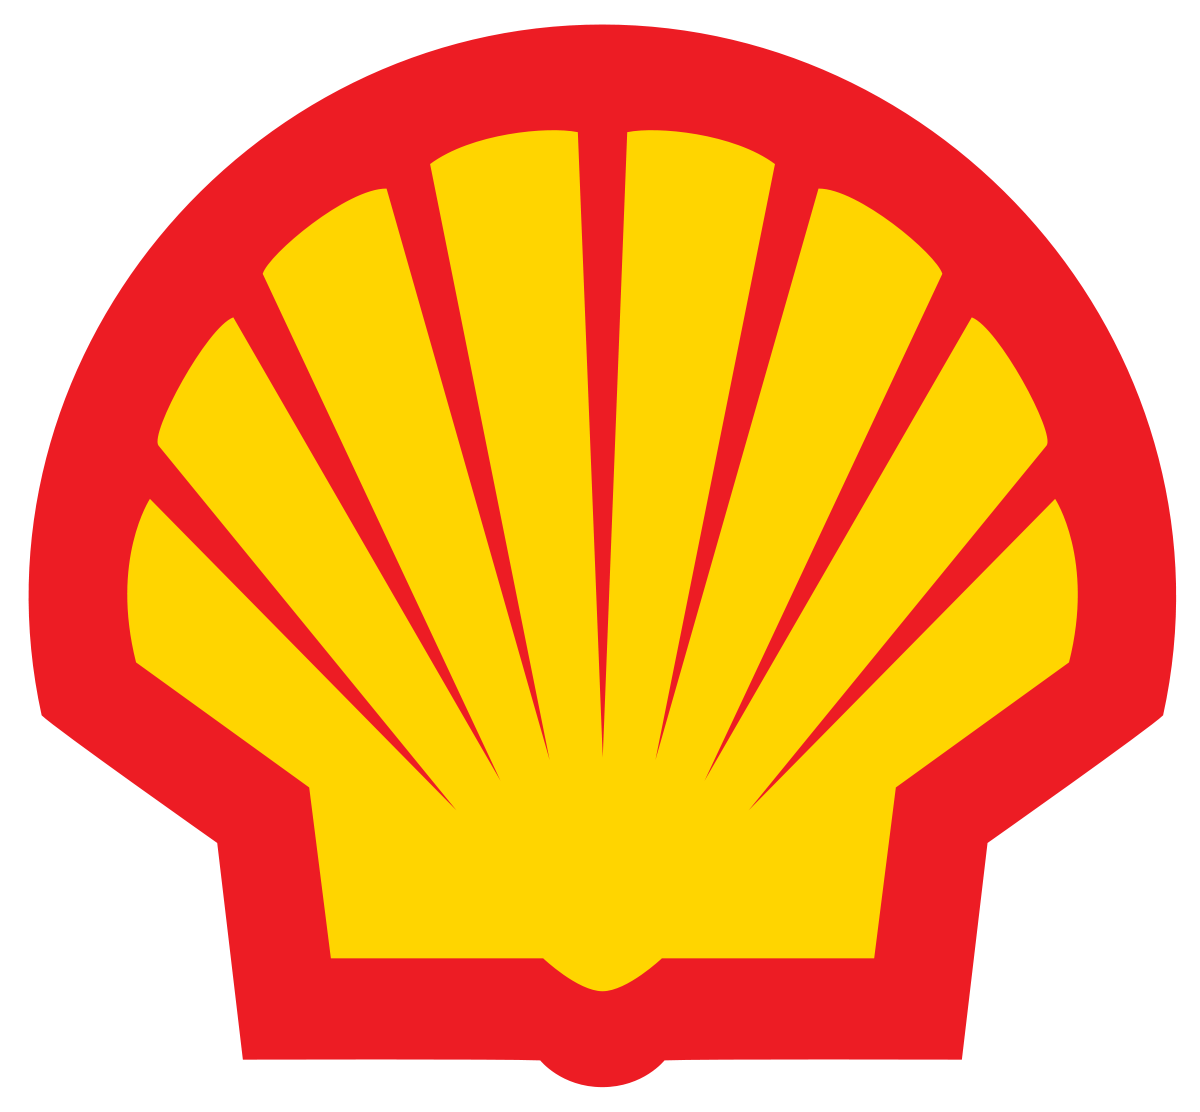 Gas Station Companies Logo - Shell Oil to Begin Installing Fast EV Charging Stations at its Gas ...